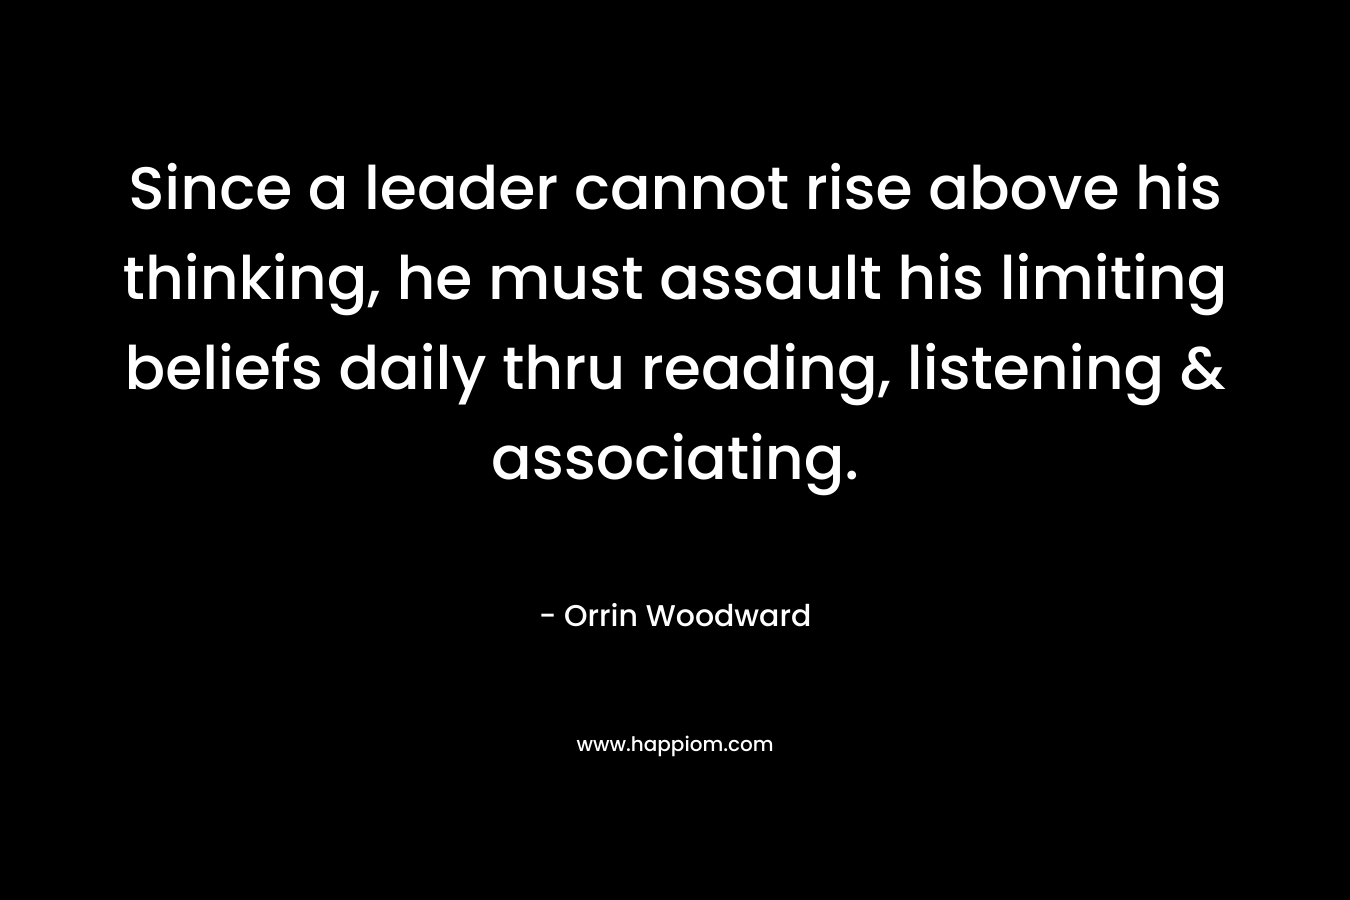 Since a leader cannot rise above his thinking, he must assault his limiting beliefs daily thru reading, listening & associating. – Orrin Woodward